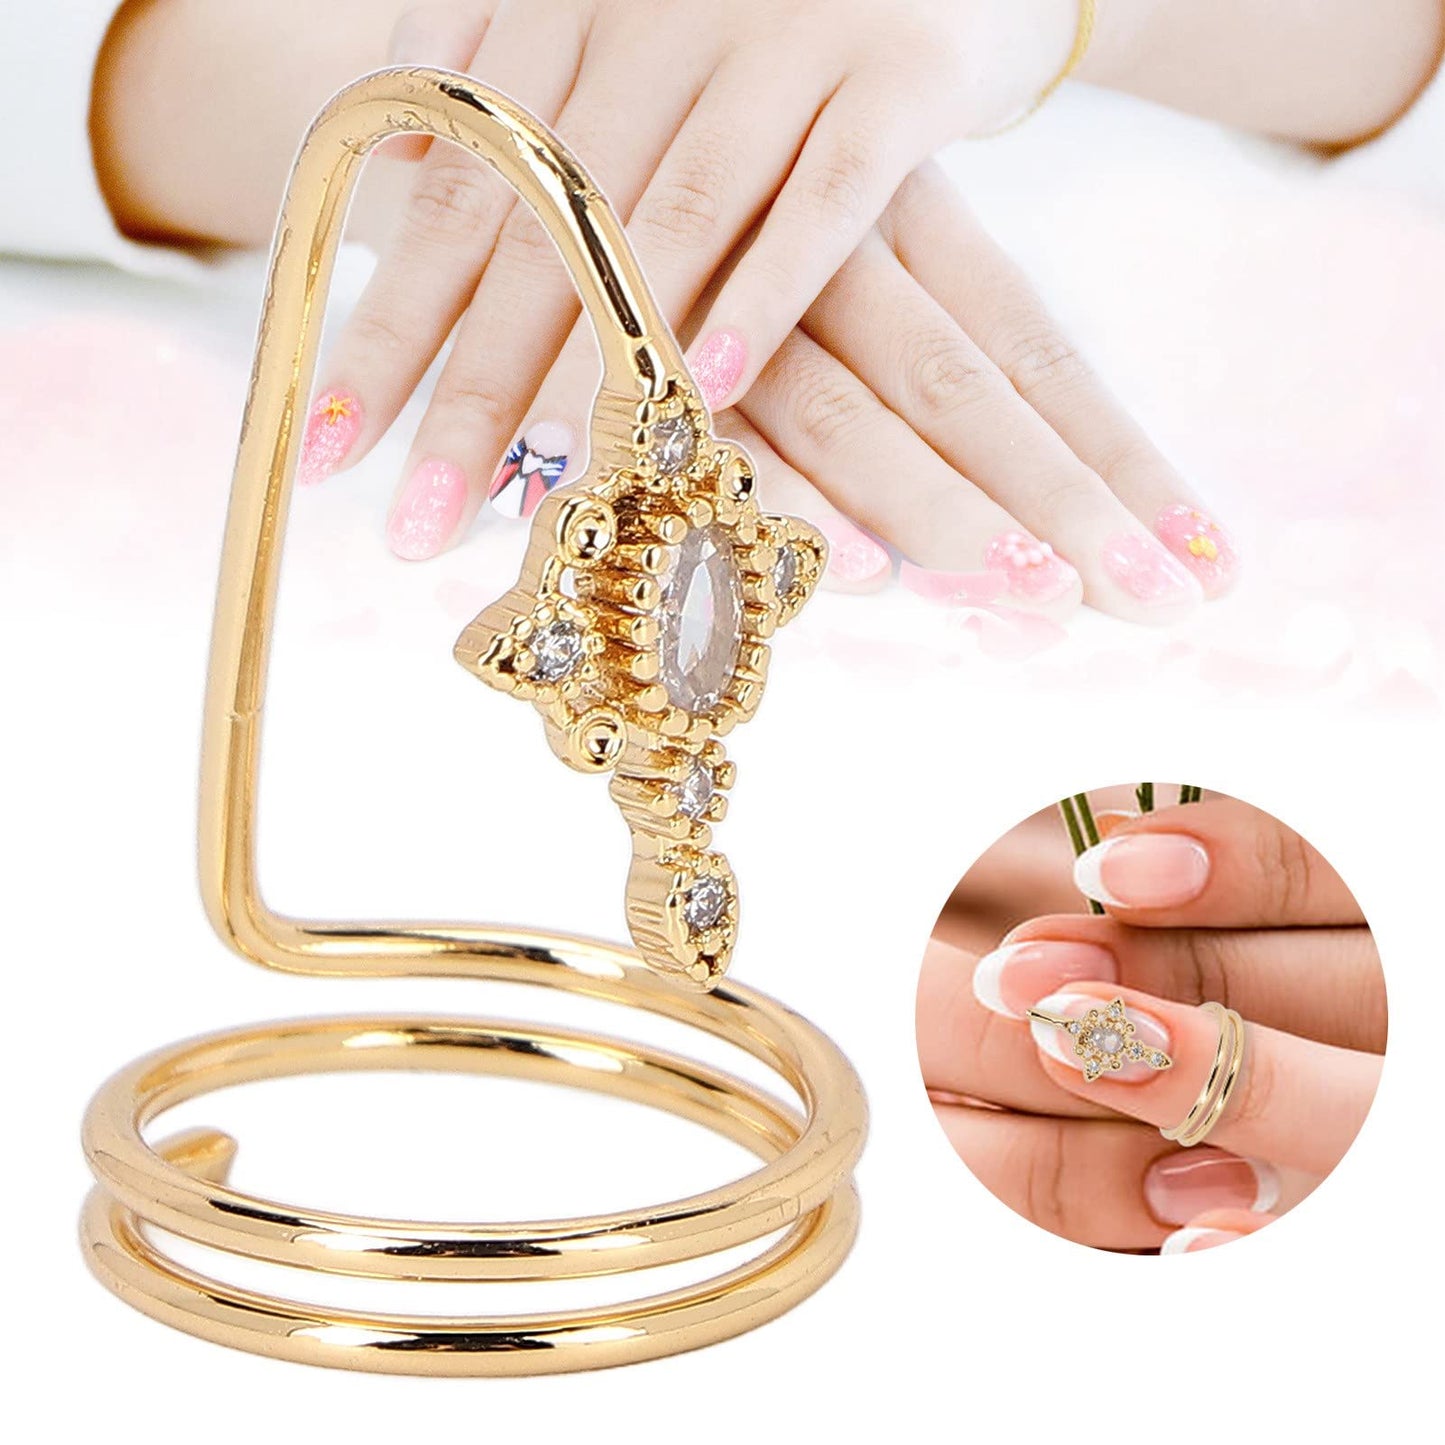 Rhinestone Finger Tip Nail Ring Women Finger Nail Ring Stylish Adjustable Opening Nail Art Charms Accessories for Fingernail Protect(Gold)